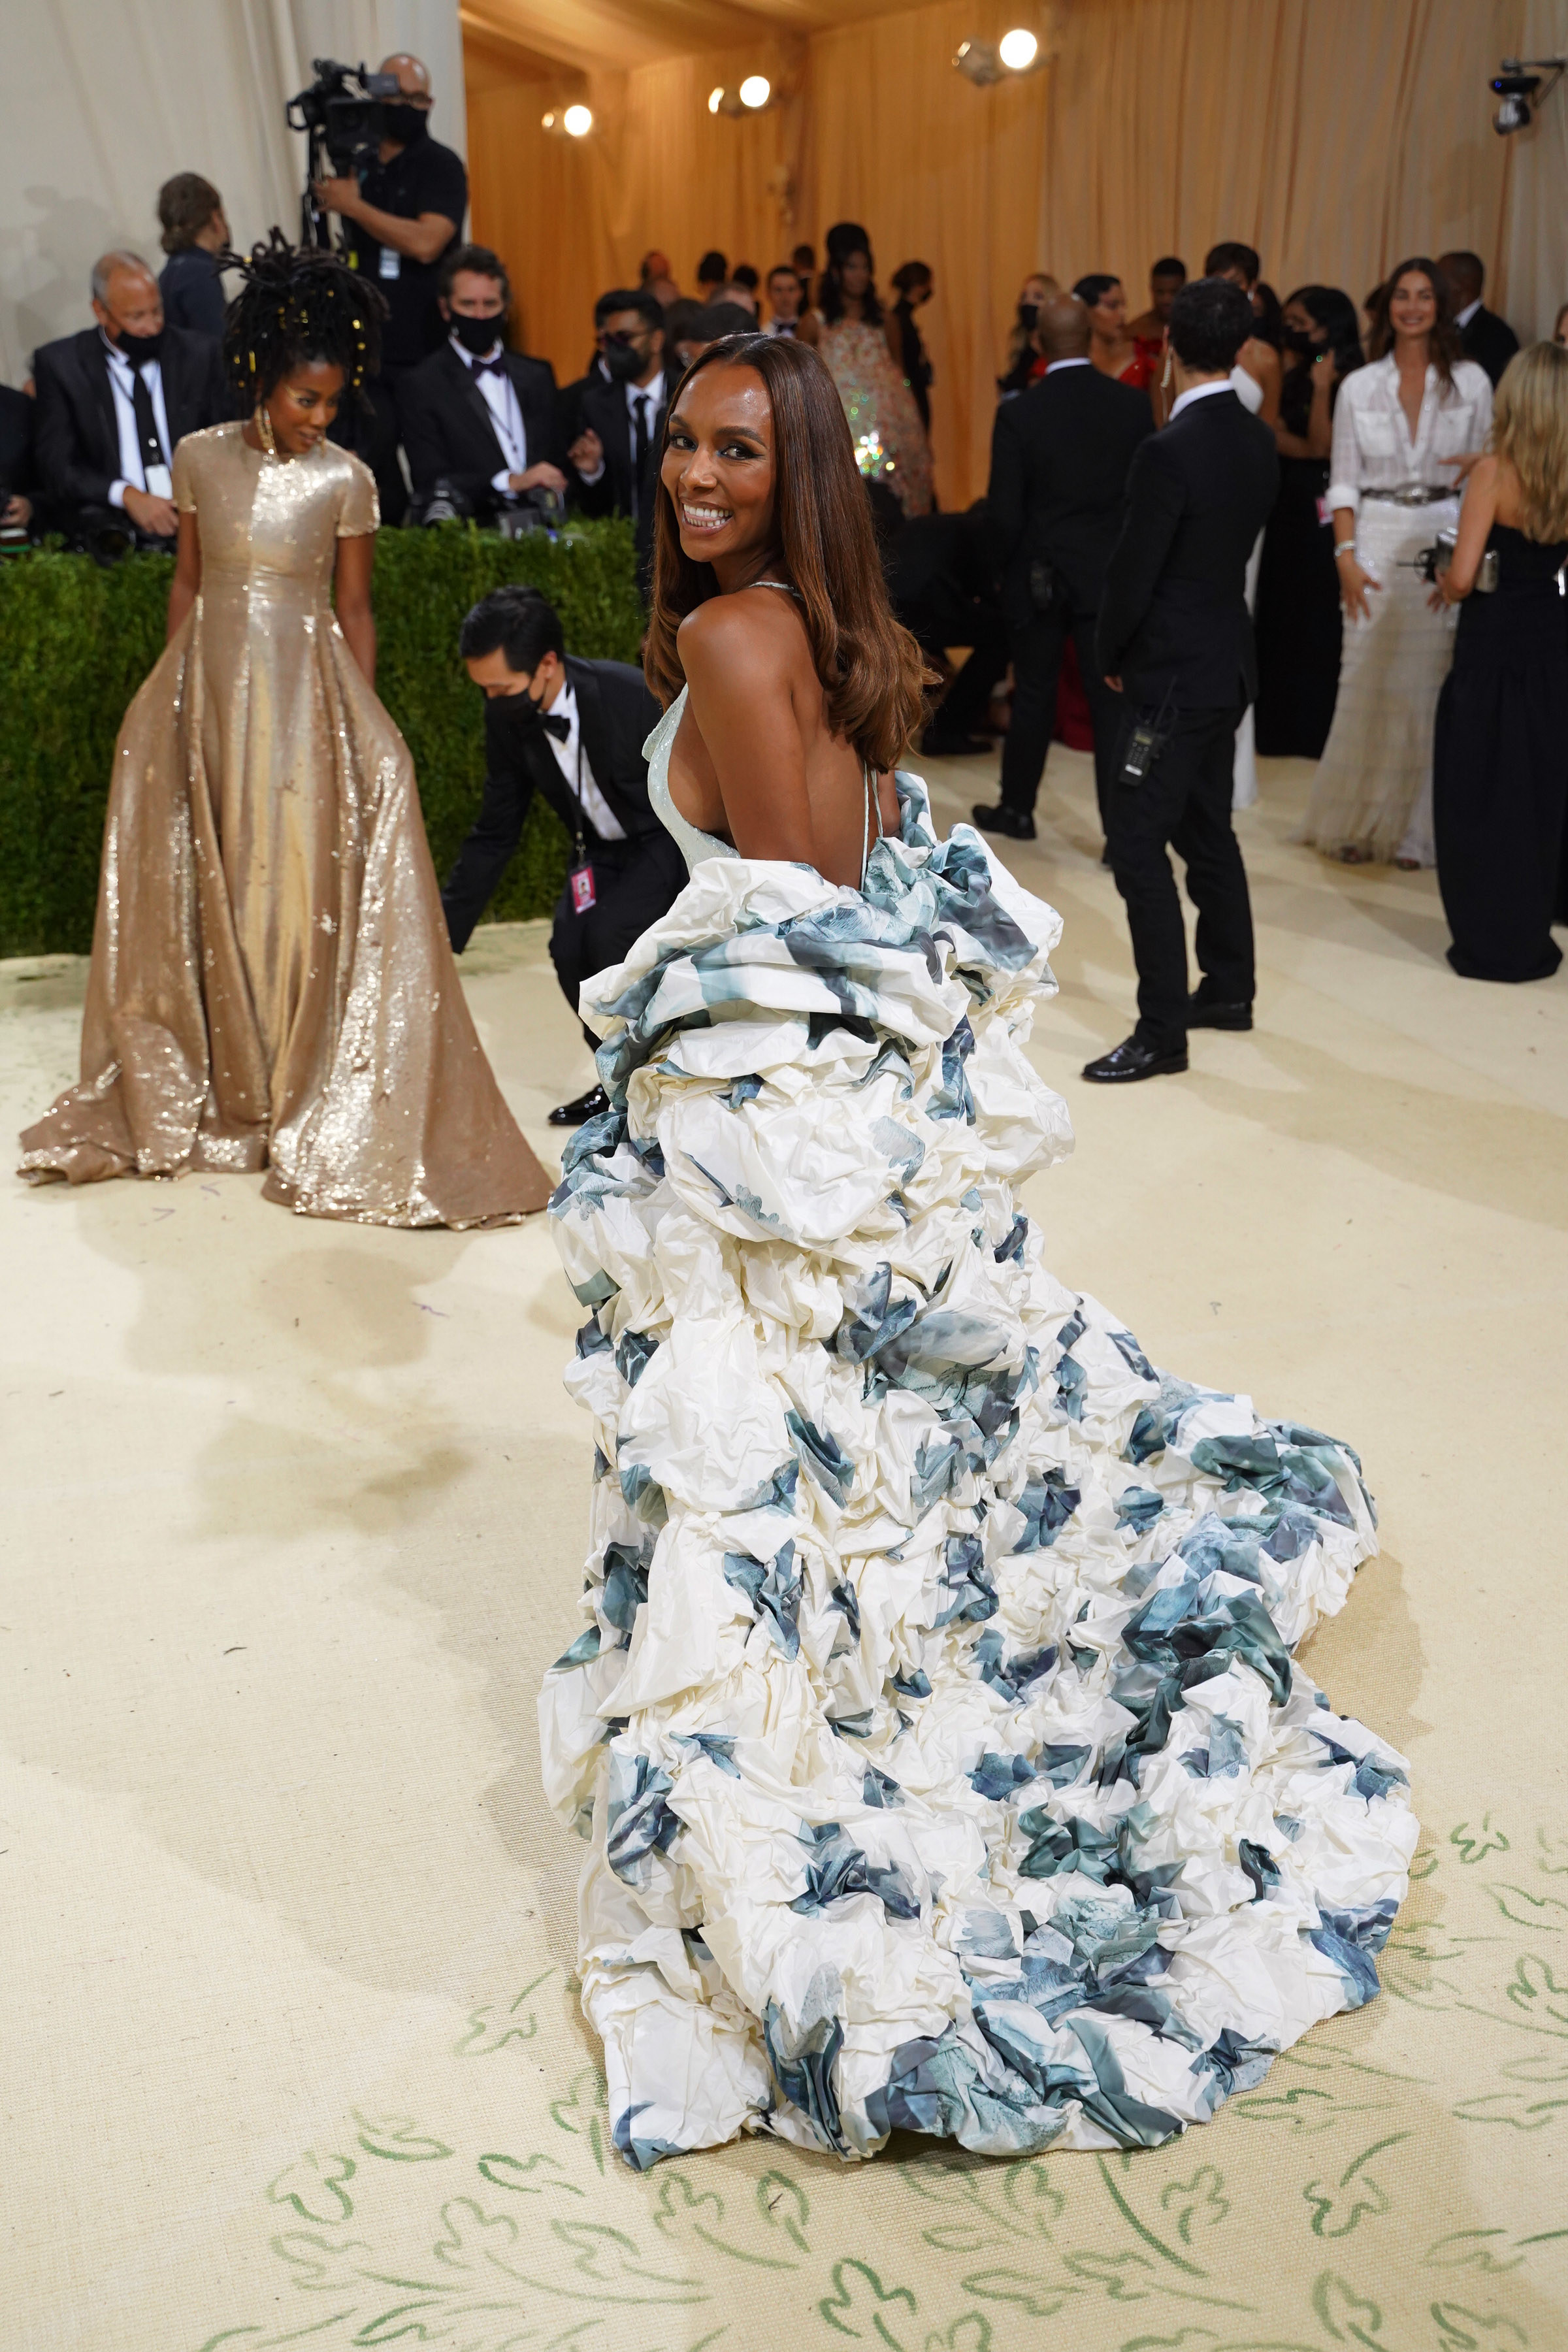 Janet Mock grins in a ballgown at a Met event